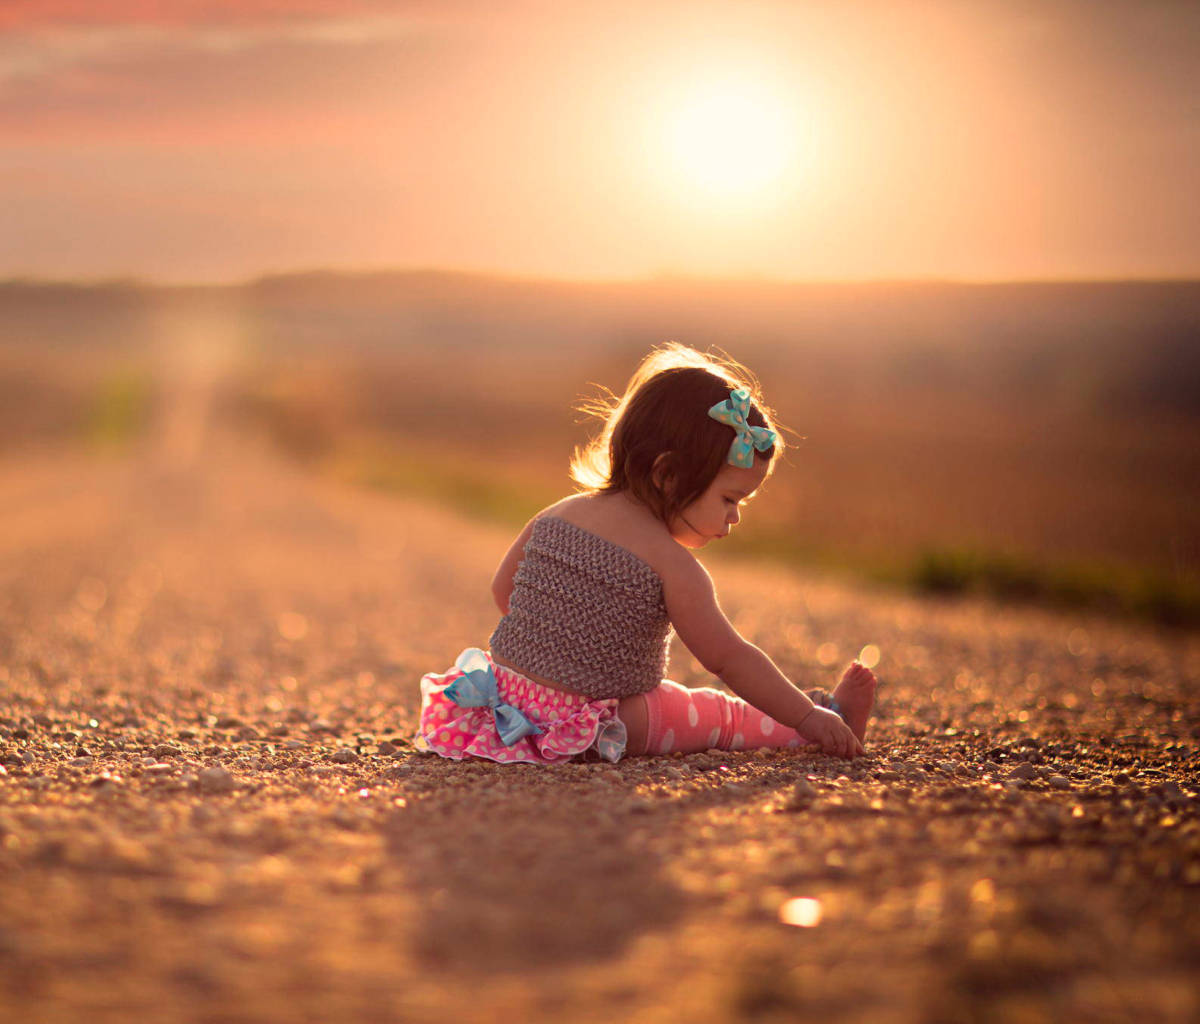 Child On Road At Sunset wallpaper 1200x1024